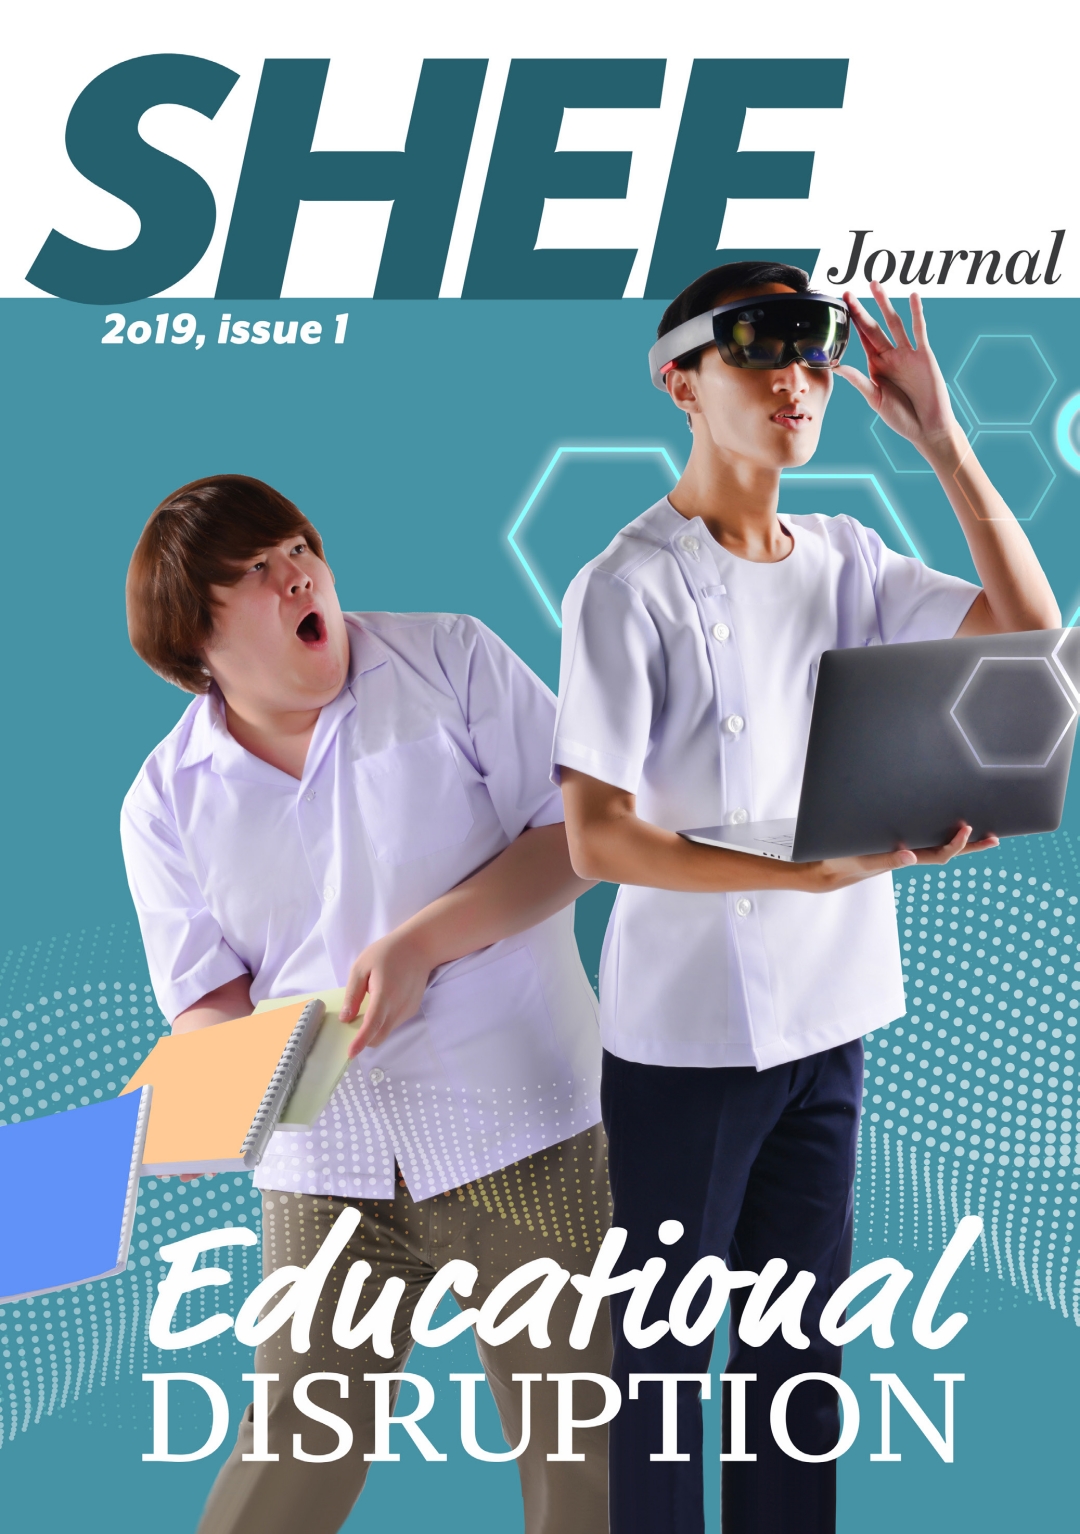 journal-2019-01-cover18